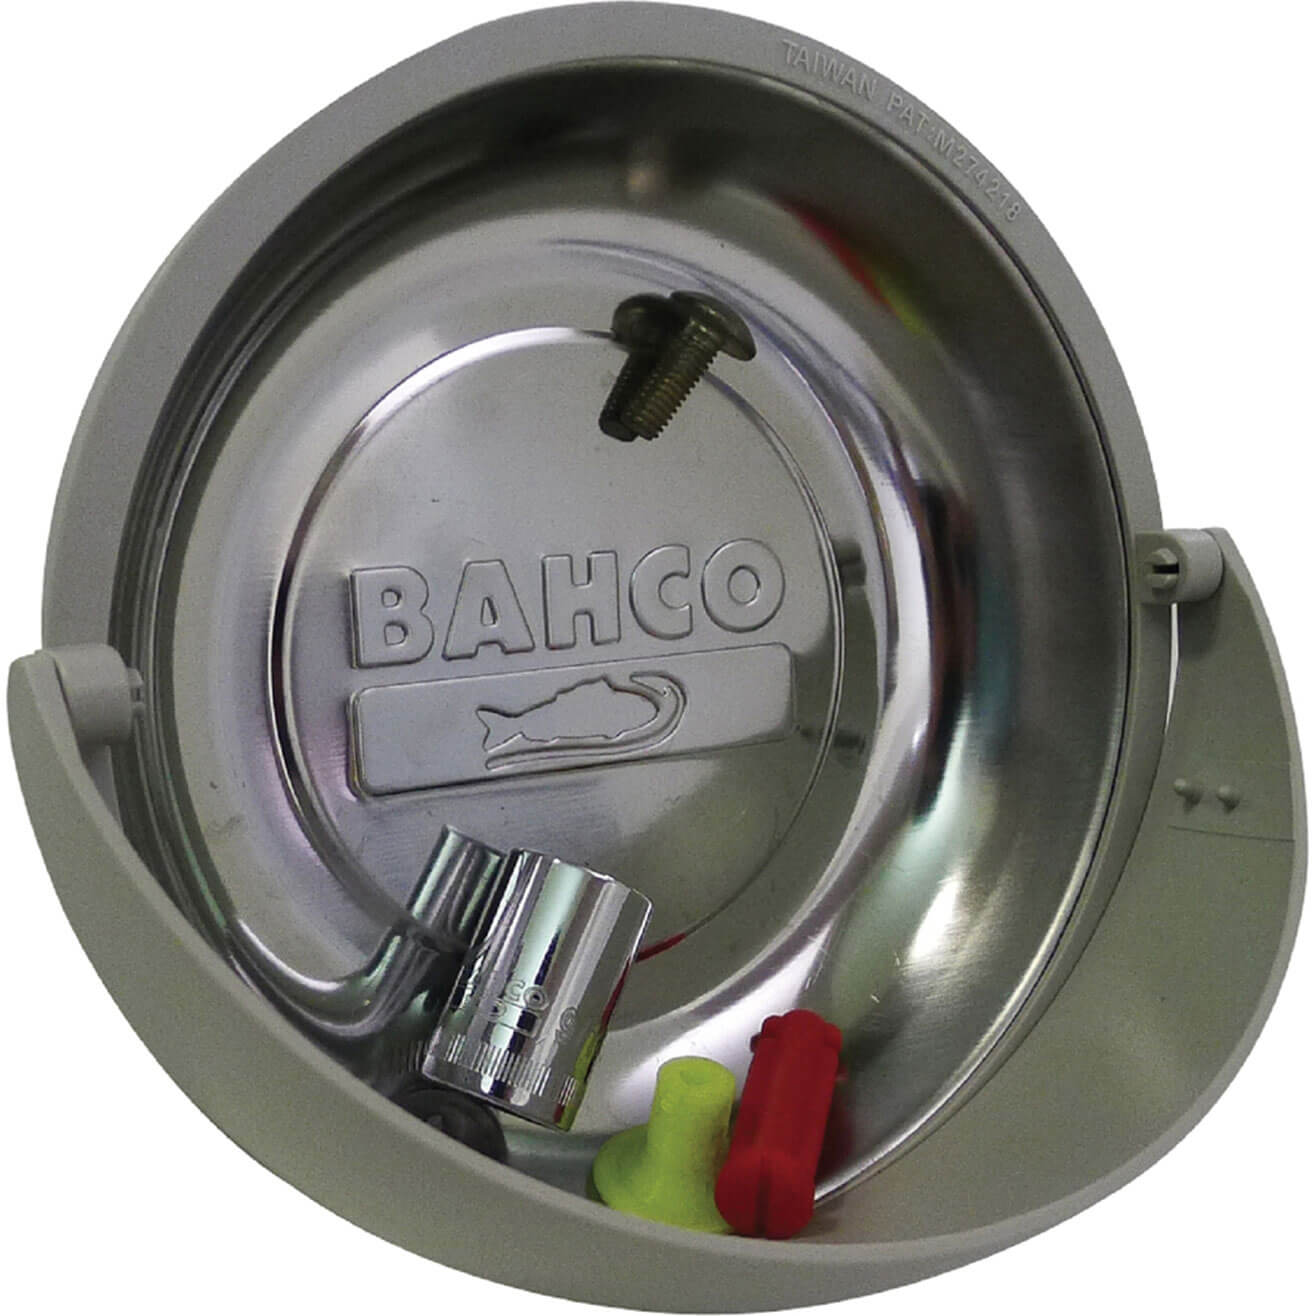 Photos - Car Service Station Equipment Bahco Stainless Steel Magnetic Circular Parts Tray BMD150 